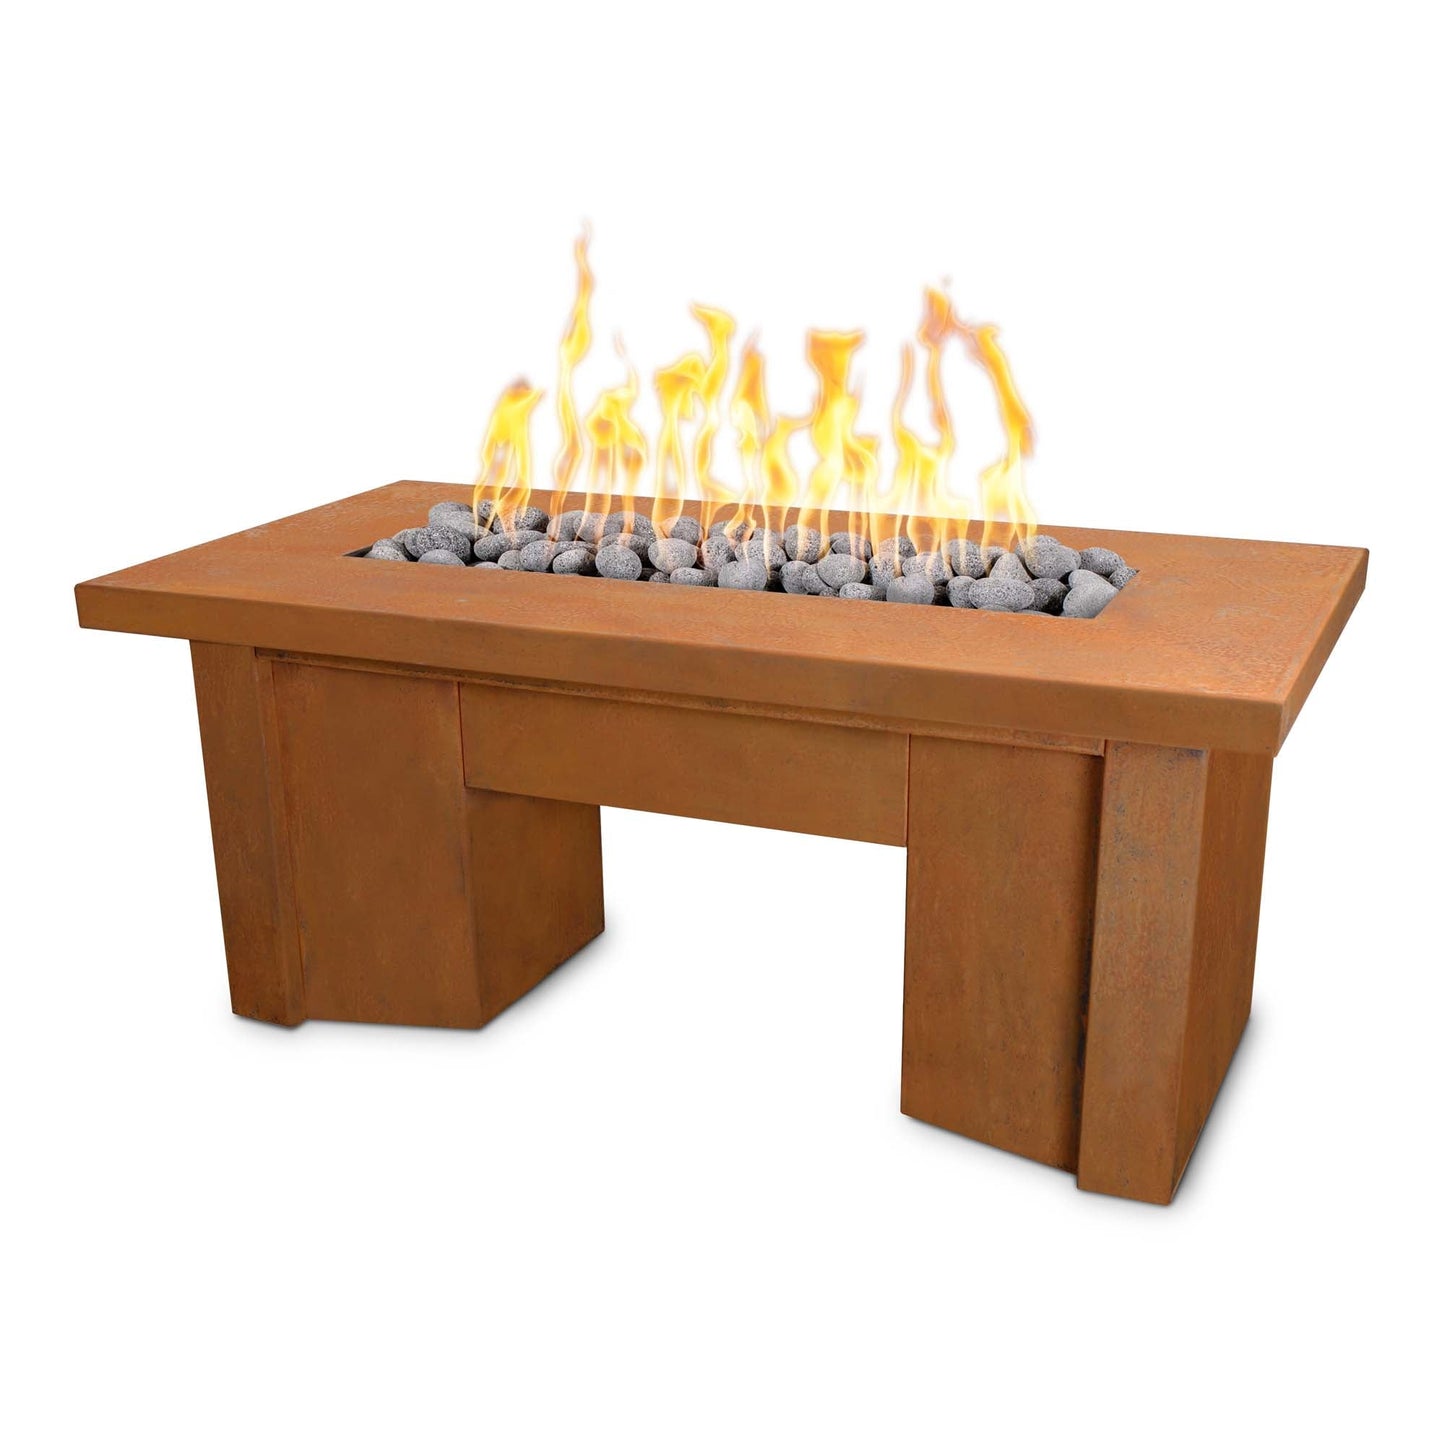 The Outdoor Plus Rectangular Alameda 78" Corten Steel Natural Gas Fire Pit with 110V Electronic Ignition